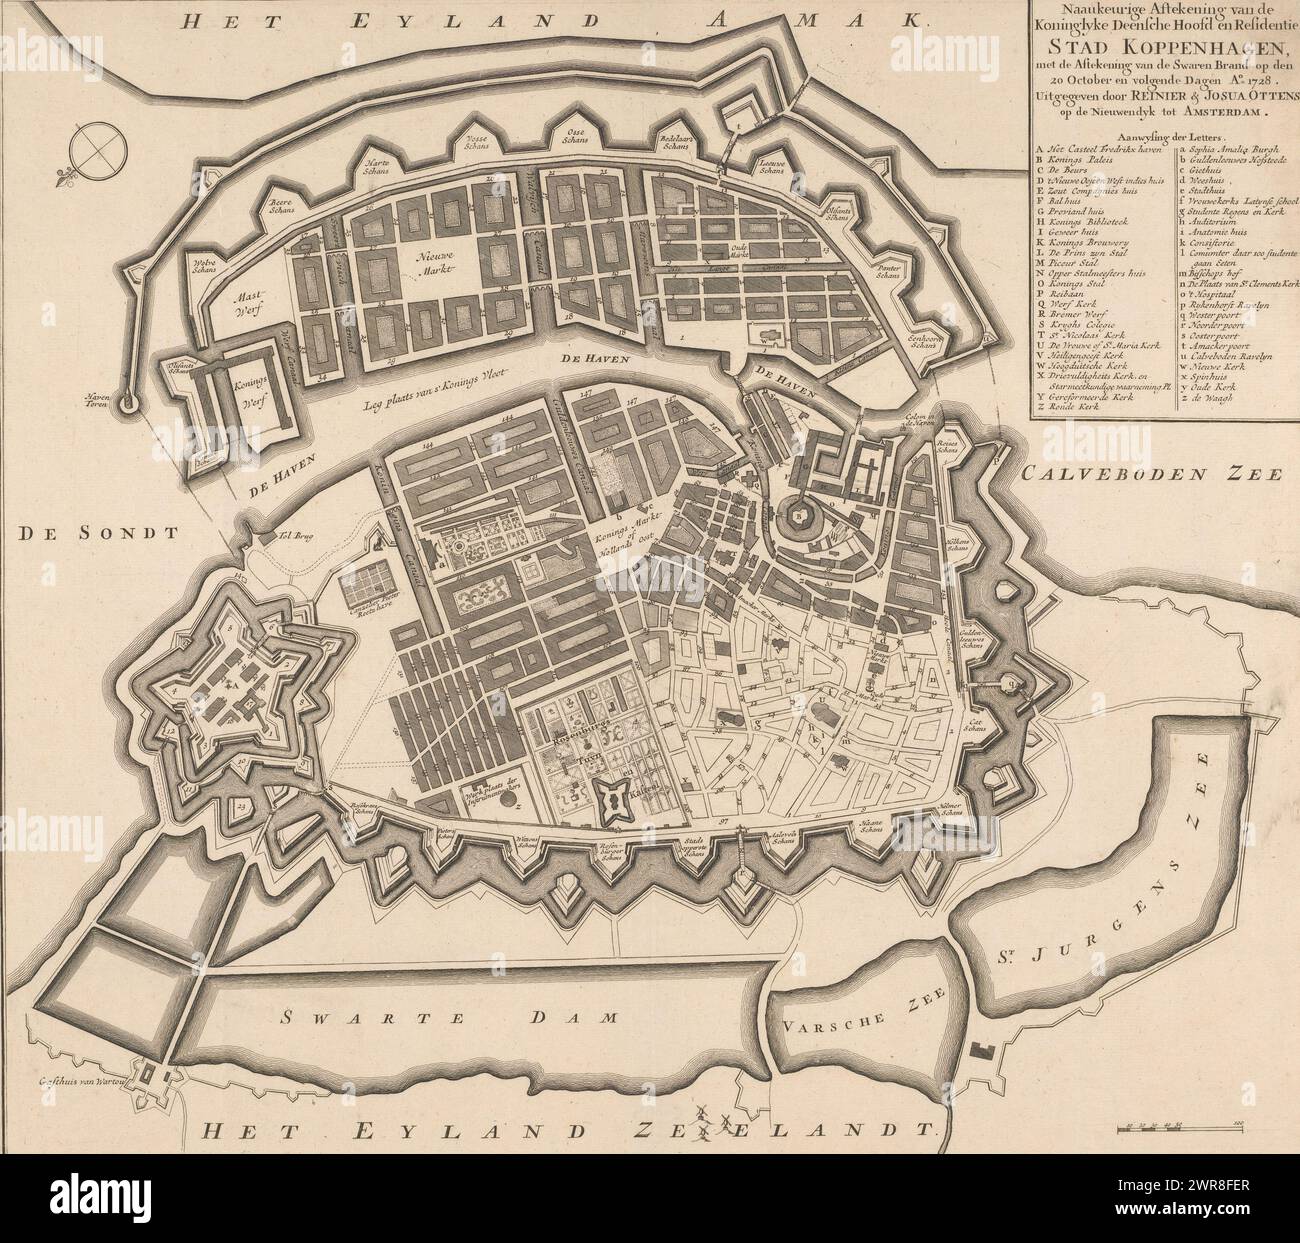 Map of Copenhagen, Accurate drawing of the royal Danish capital and residence of the city of Copenhagen (...) (title on object), Map of Copenhagen showing the damage from the fire of October 1728. The part of the city that is not shaded (bottom right) was reduced to ashes during the fire., print maker: anonymous, publisher: Reinier Ottens (I) & Josua, Amsterdam, after c. 1728, paper, etching, engraving, height 473 mm × width 522 mm, print Stock Photo